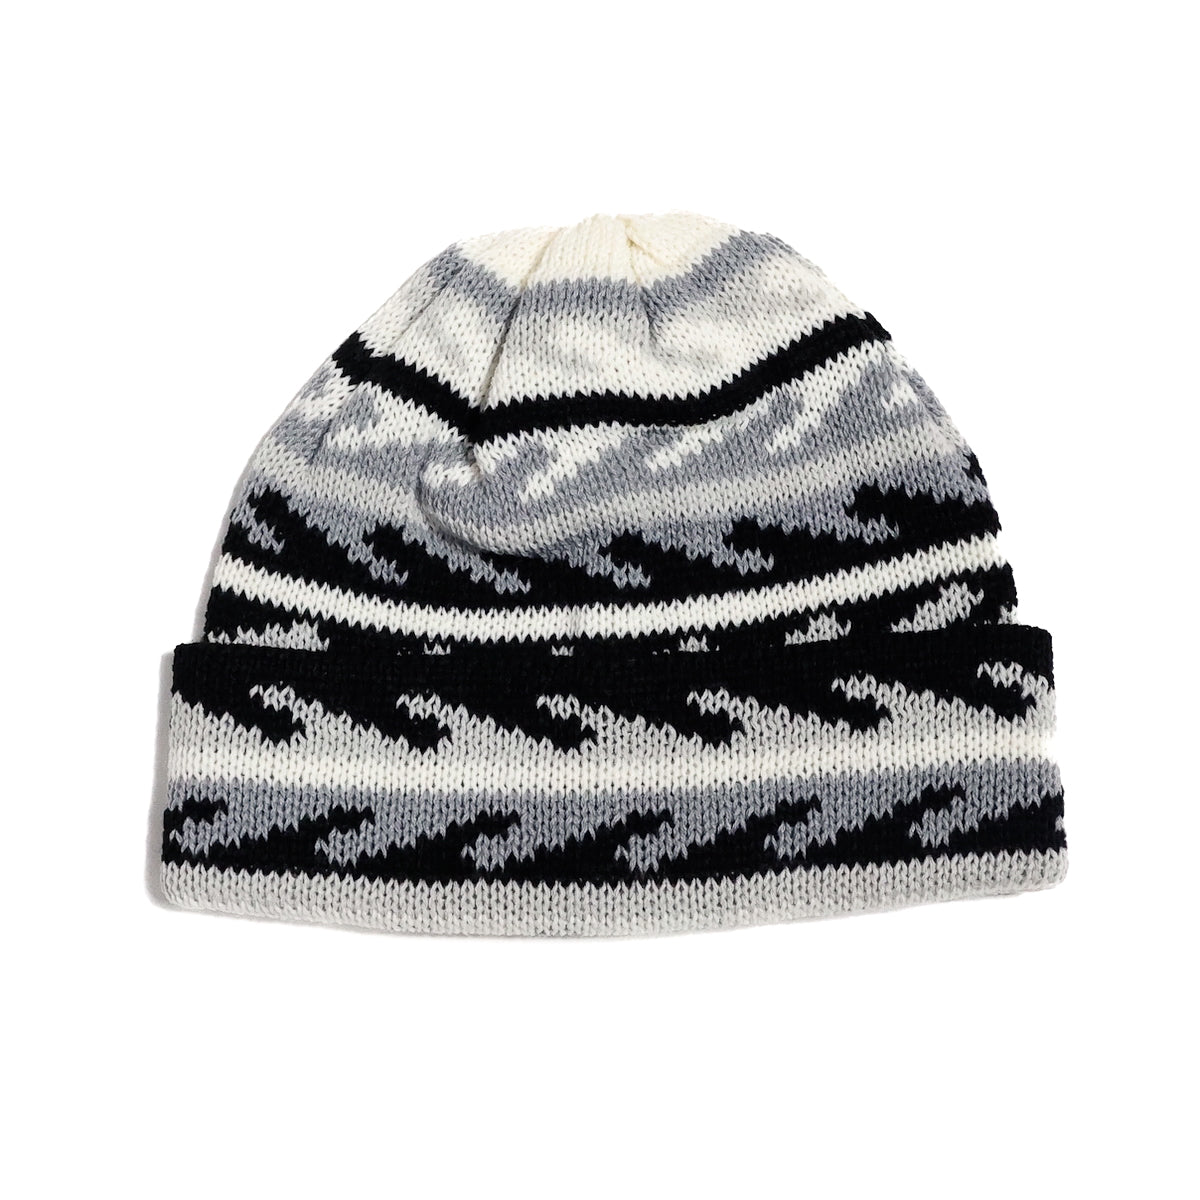 P A C S 「WAVE BEANIE / Gray 」 – SISTER